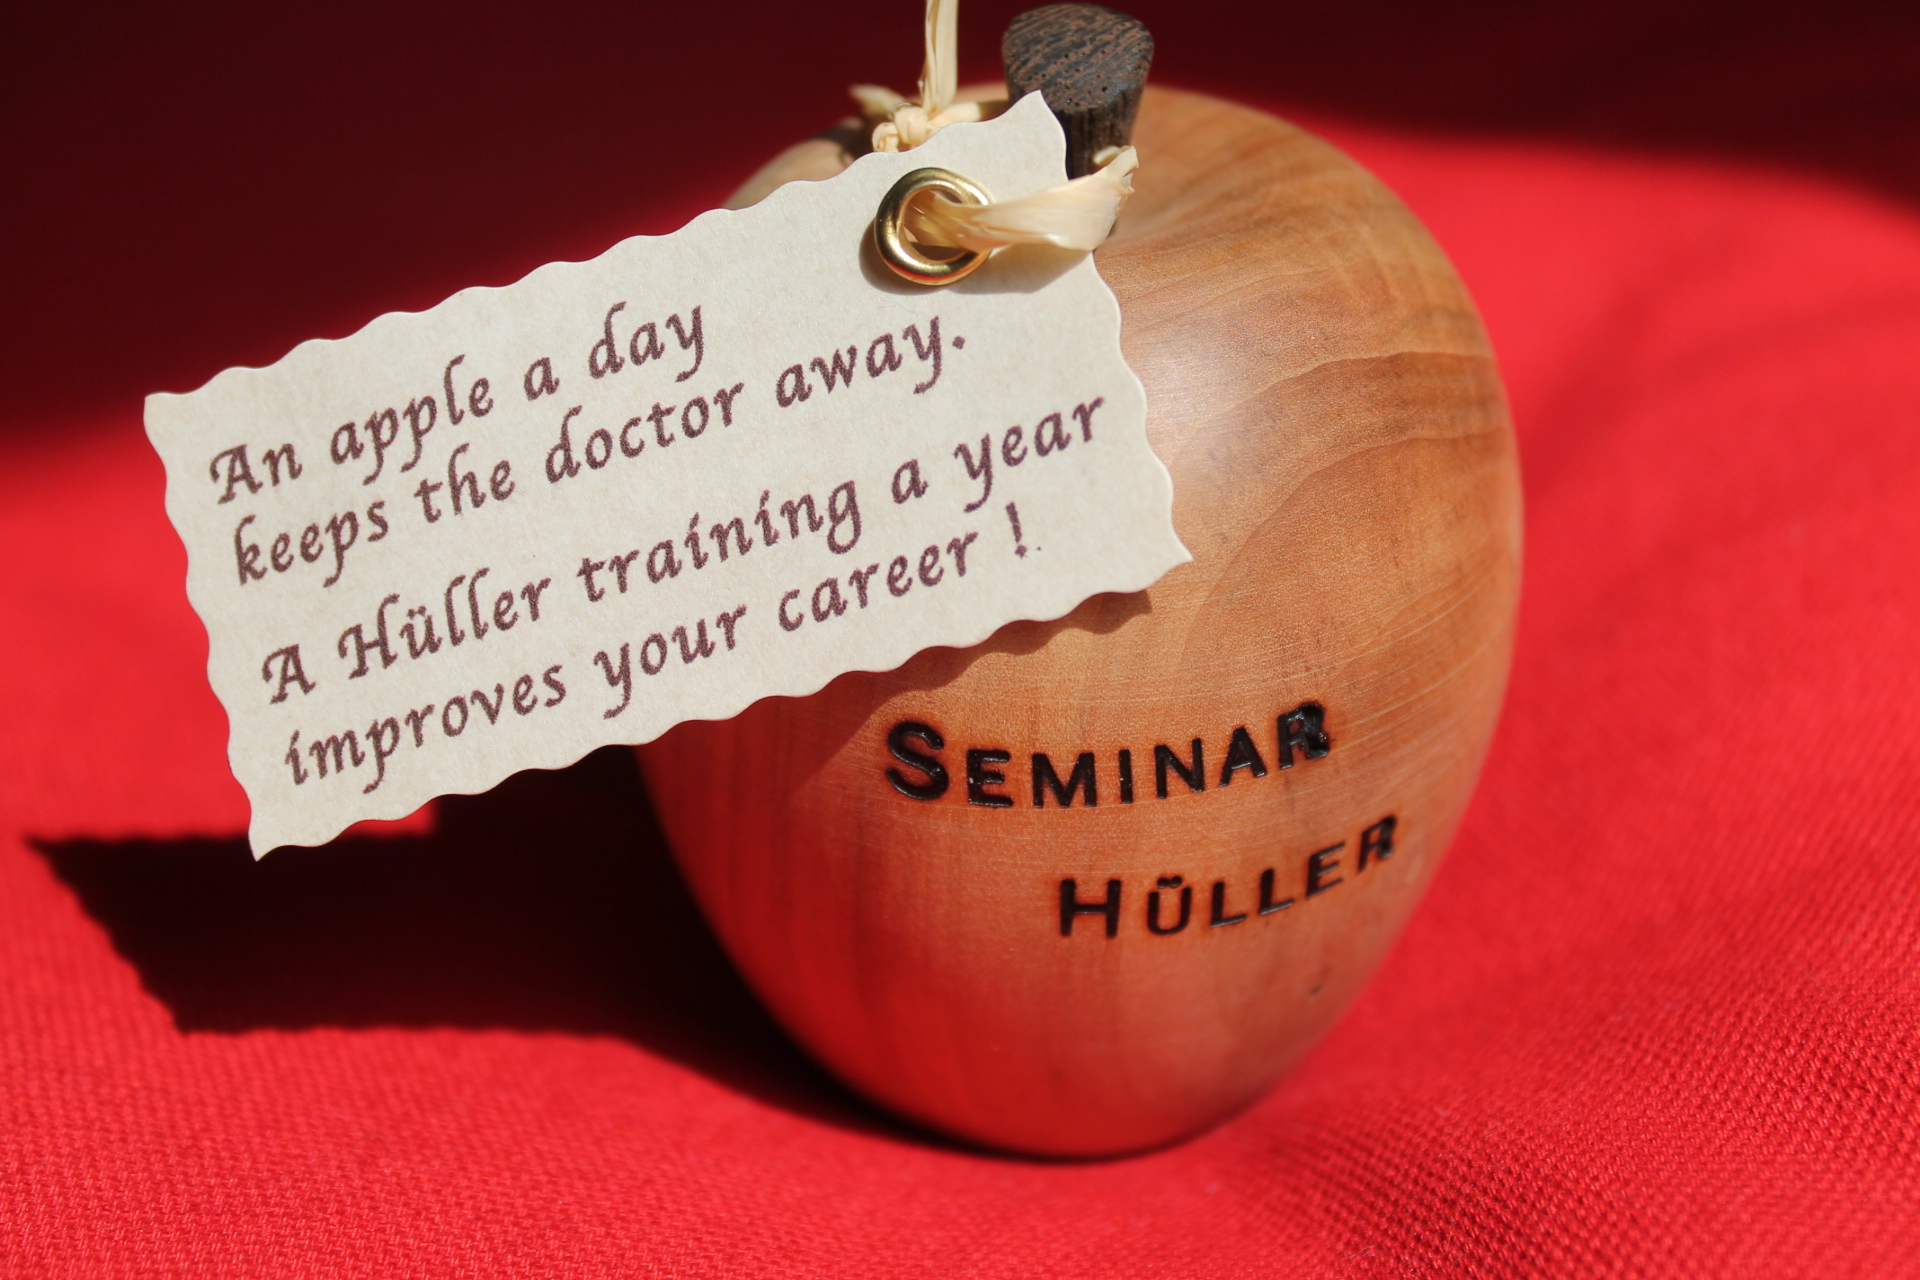 An apple a day keeps the doctor away. A Hüller training a year improves your career!